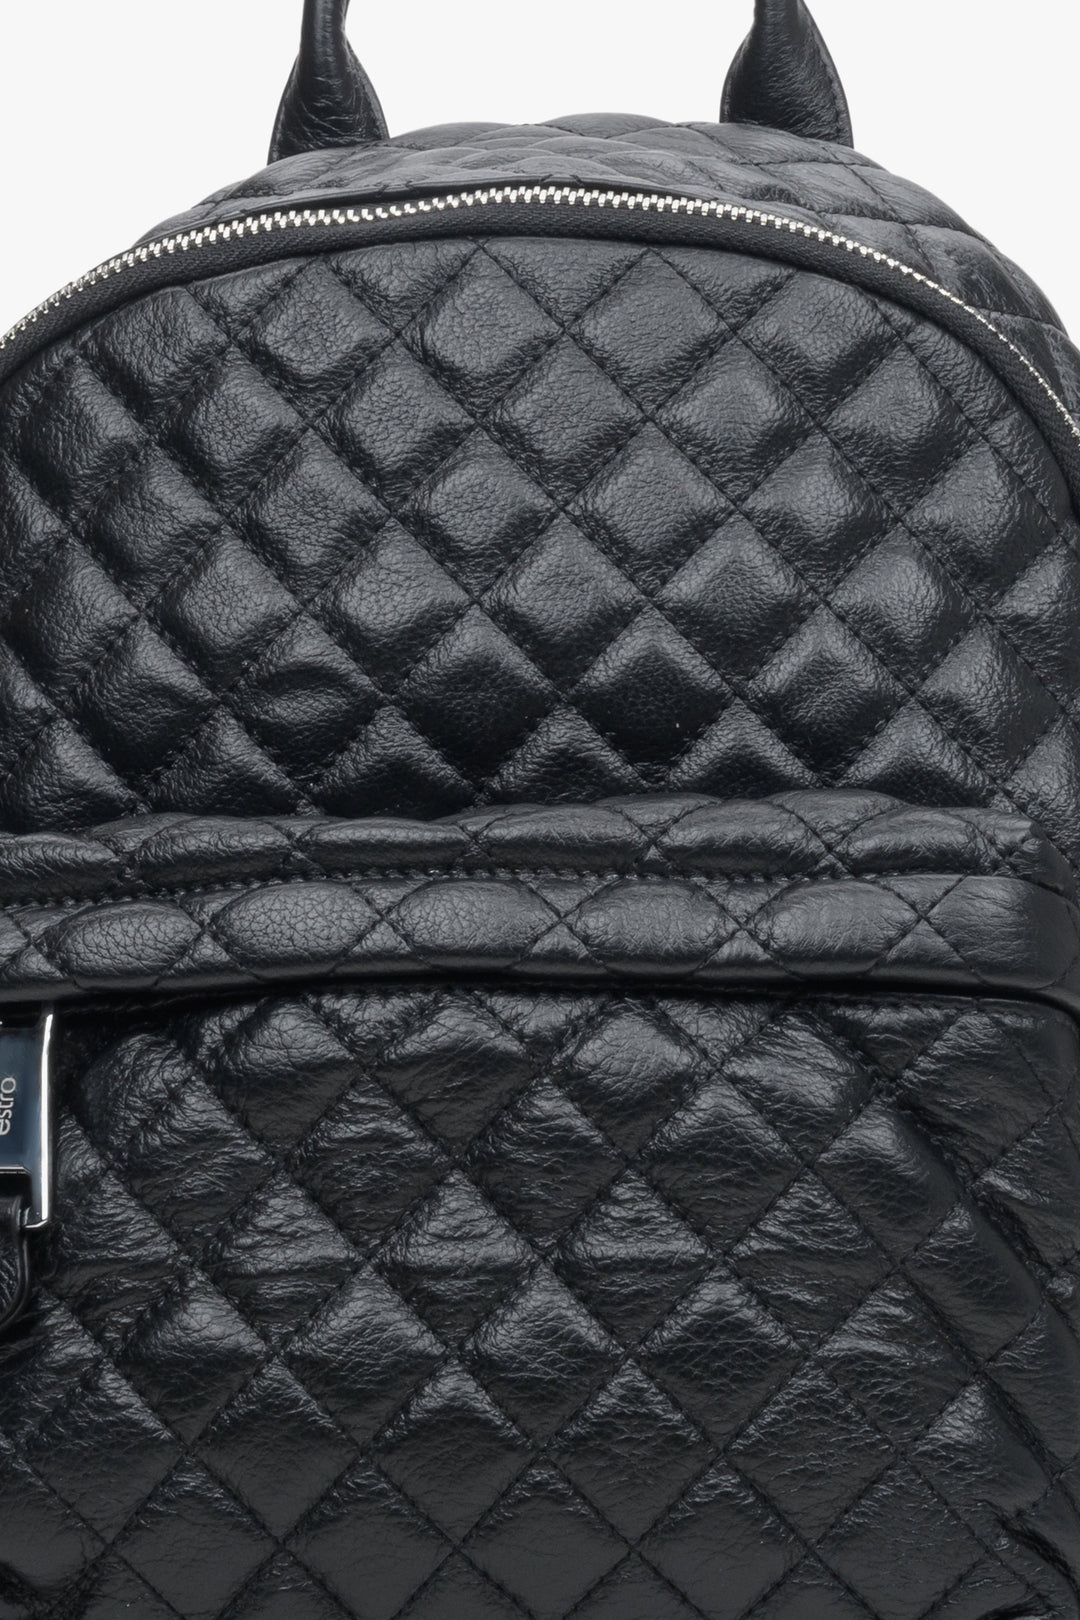 Women's black leather backpack by Estro - close-up of the stitching detail.